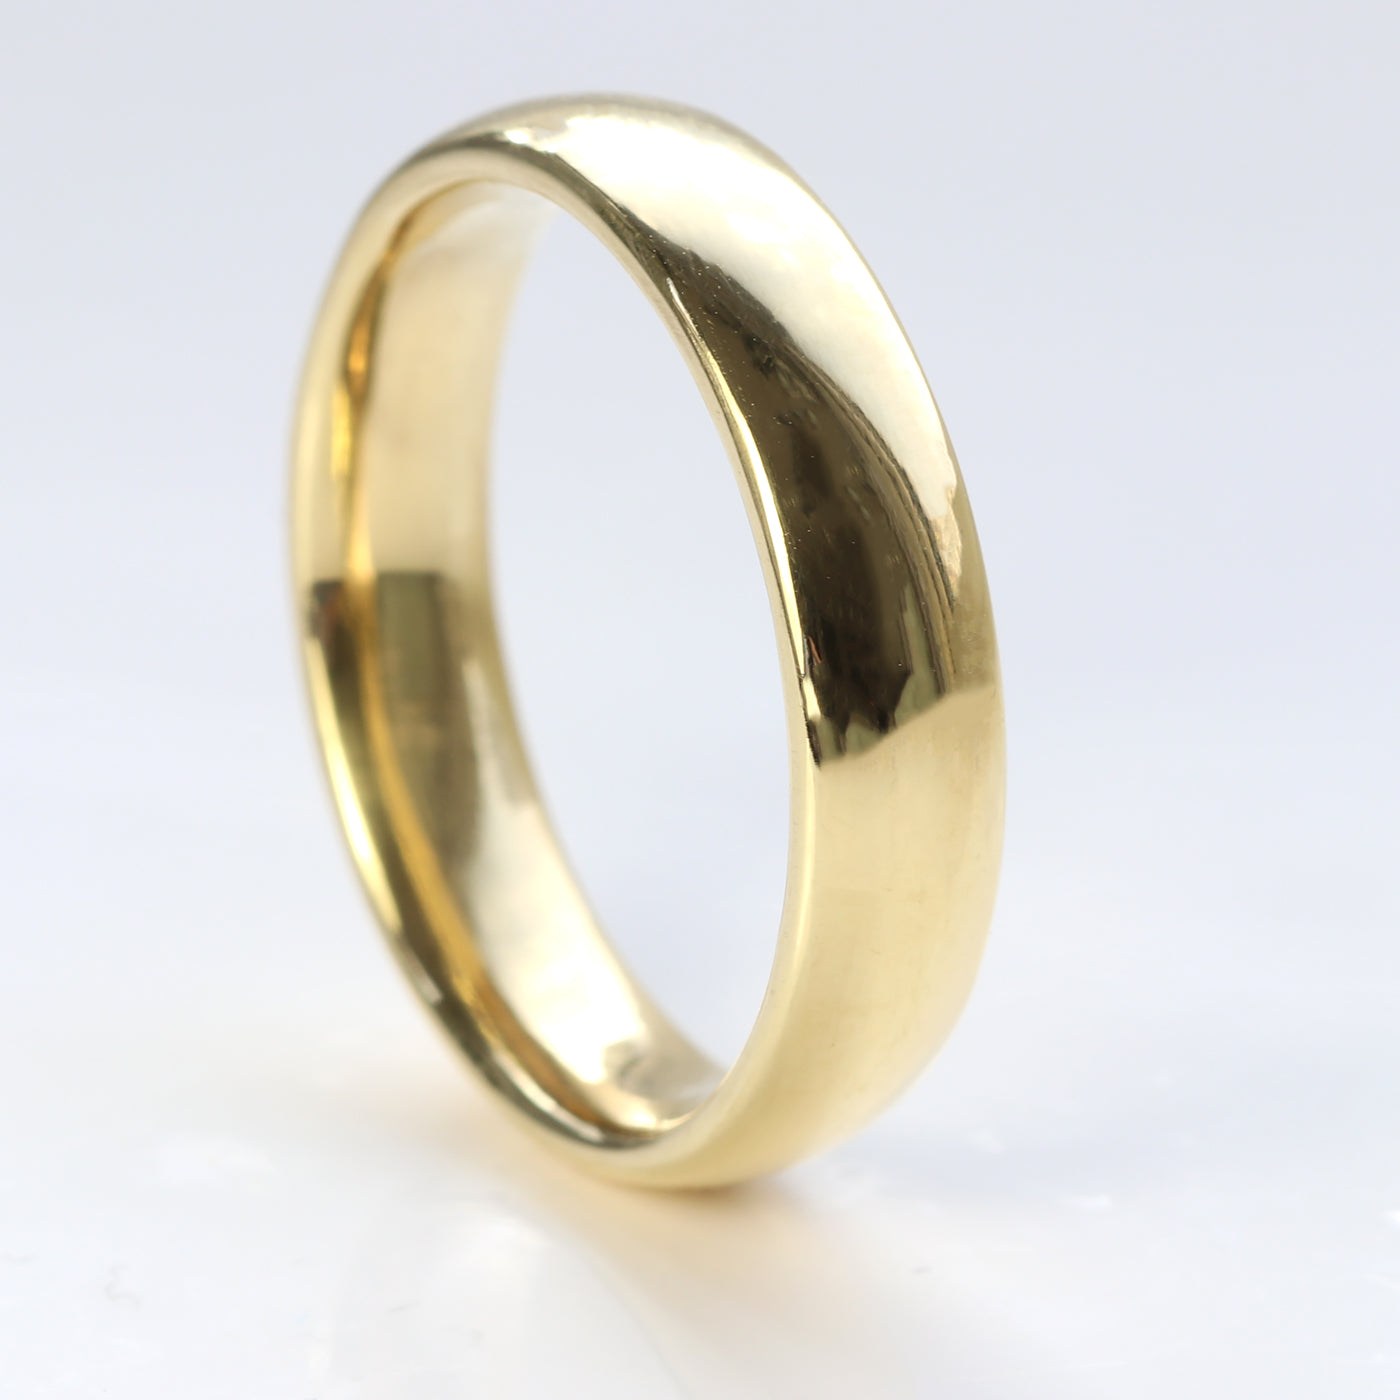 5mm x 2mm comfort fit wedding ring yellow gold